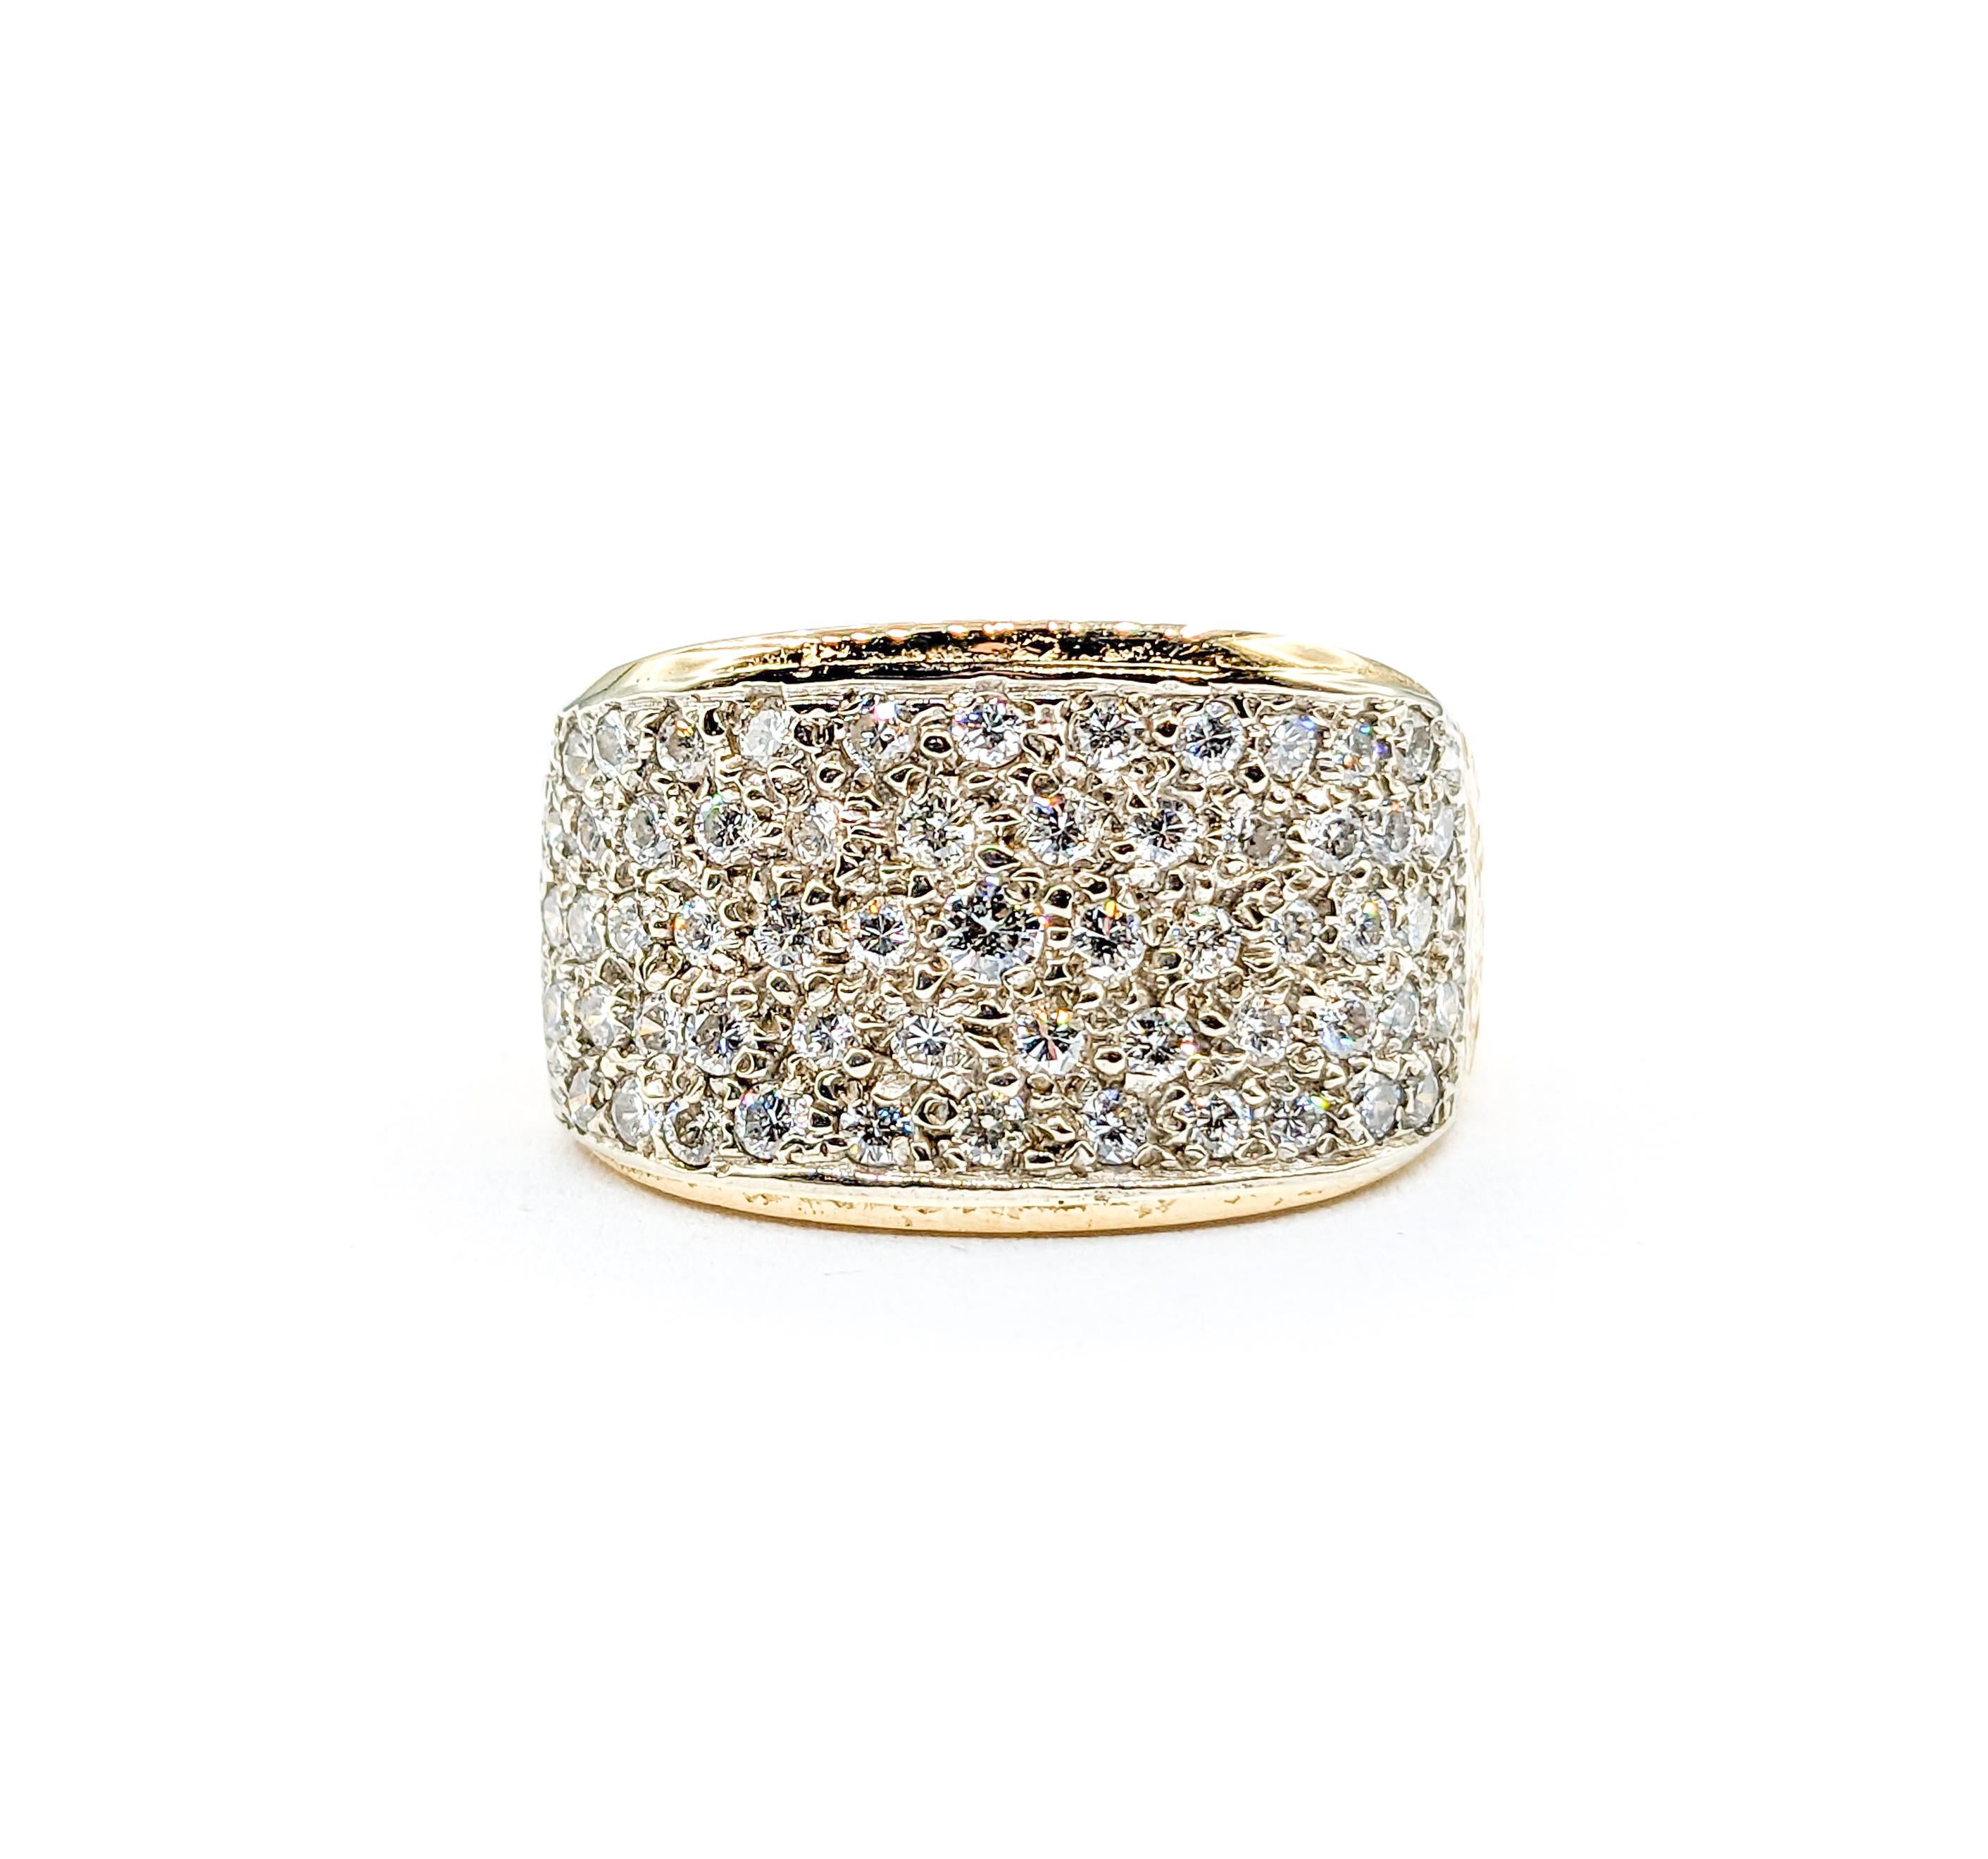 1.00ctw Pave Diamond Ring in Textured Gold

Introducing an exquisite Pave Diamond Ring in 14K Yellow Gold. Adorned with 1.0 carat total weight of glittering round diamonds, this ring sparkles! These near-colorless white diamonds exhibit SI clarity,